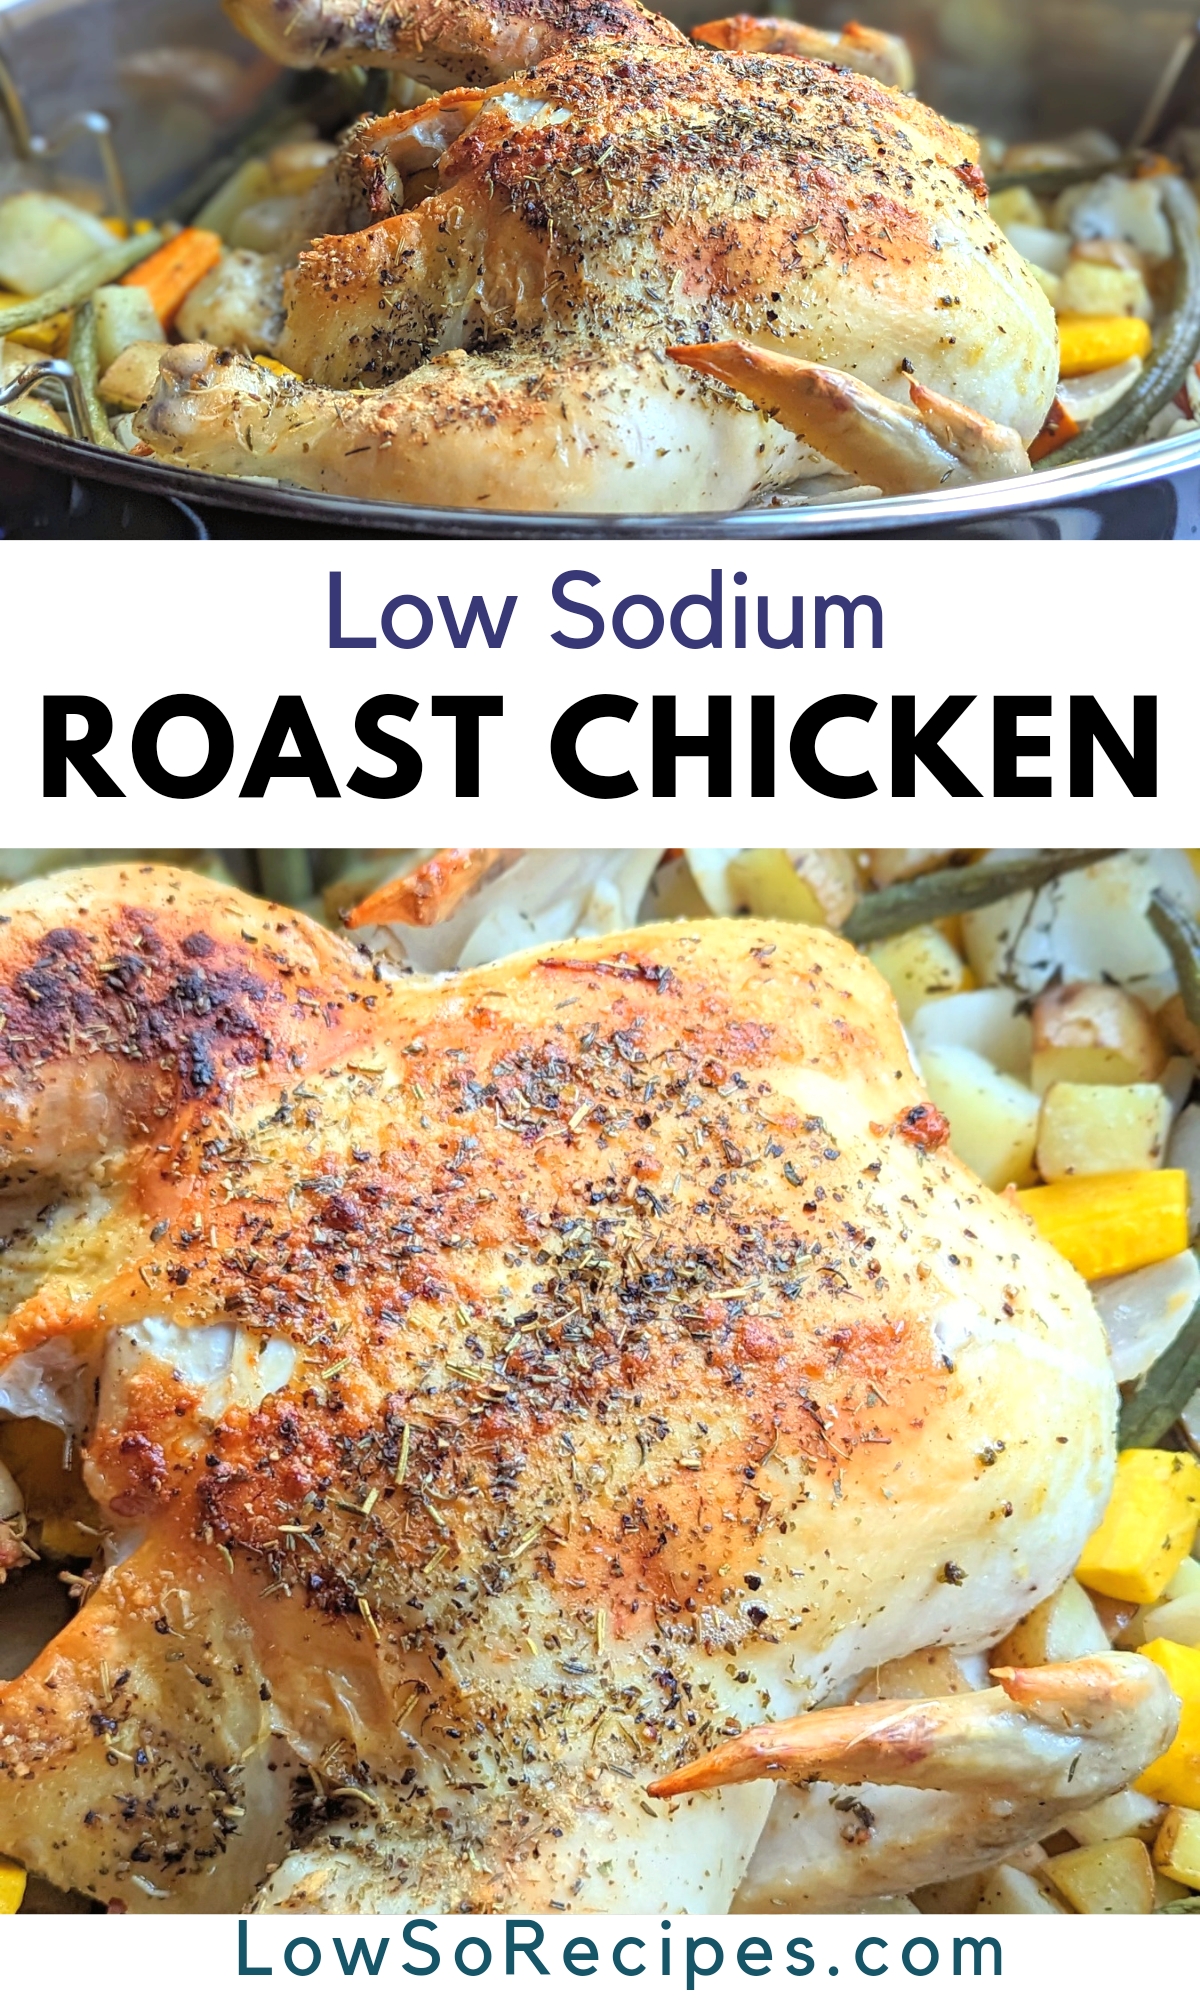 low sodium roast chicken recipe no salt added dinner ideas for company guests or family salt free meal ideas for seniors